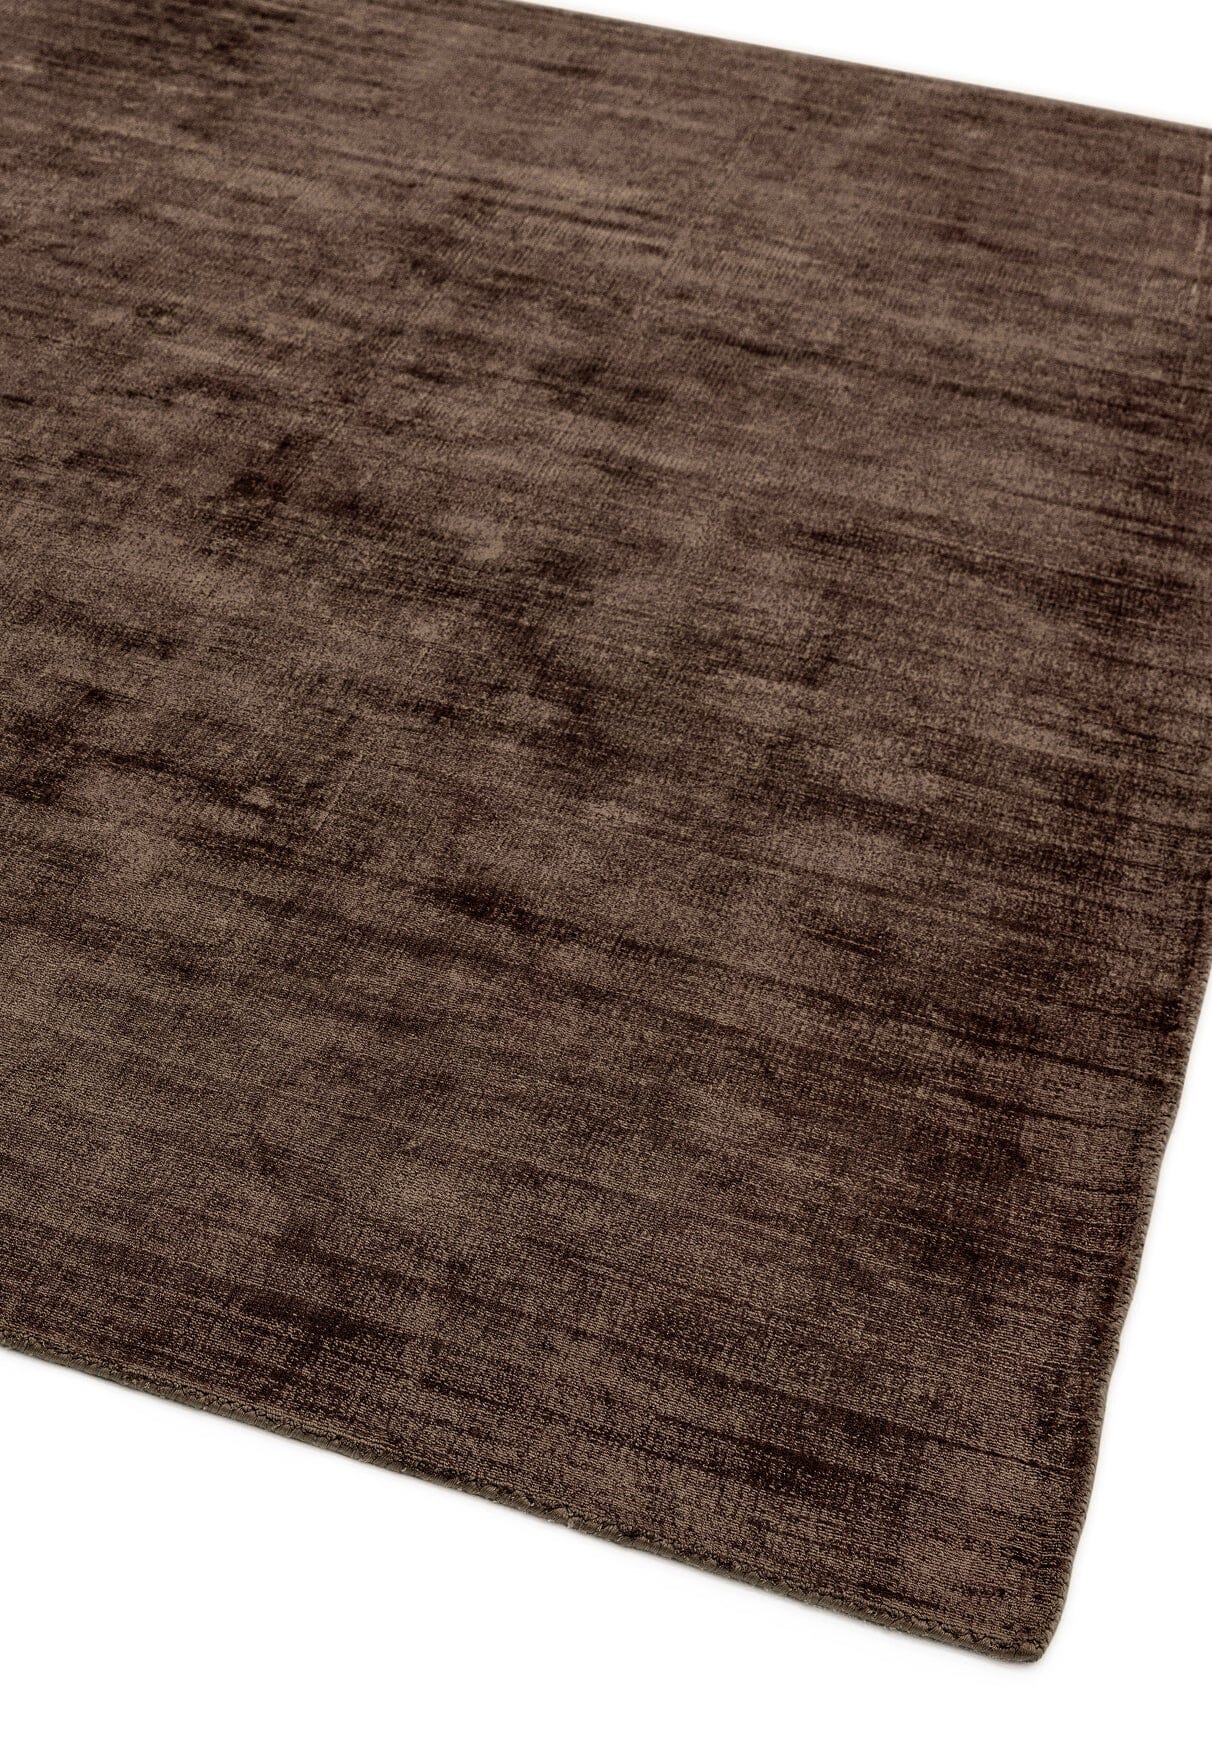 Asiatic Carpets Blade Hand Woven Rug Chocolate - 240 x 340cm